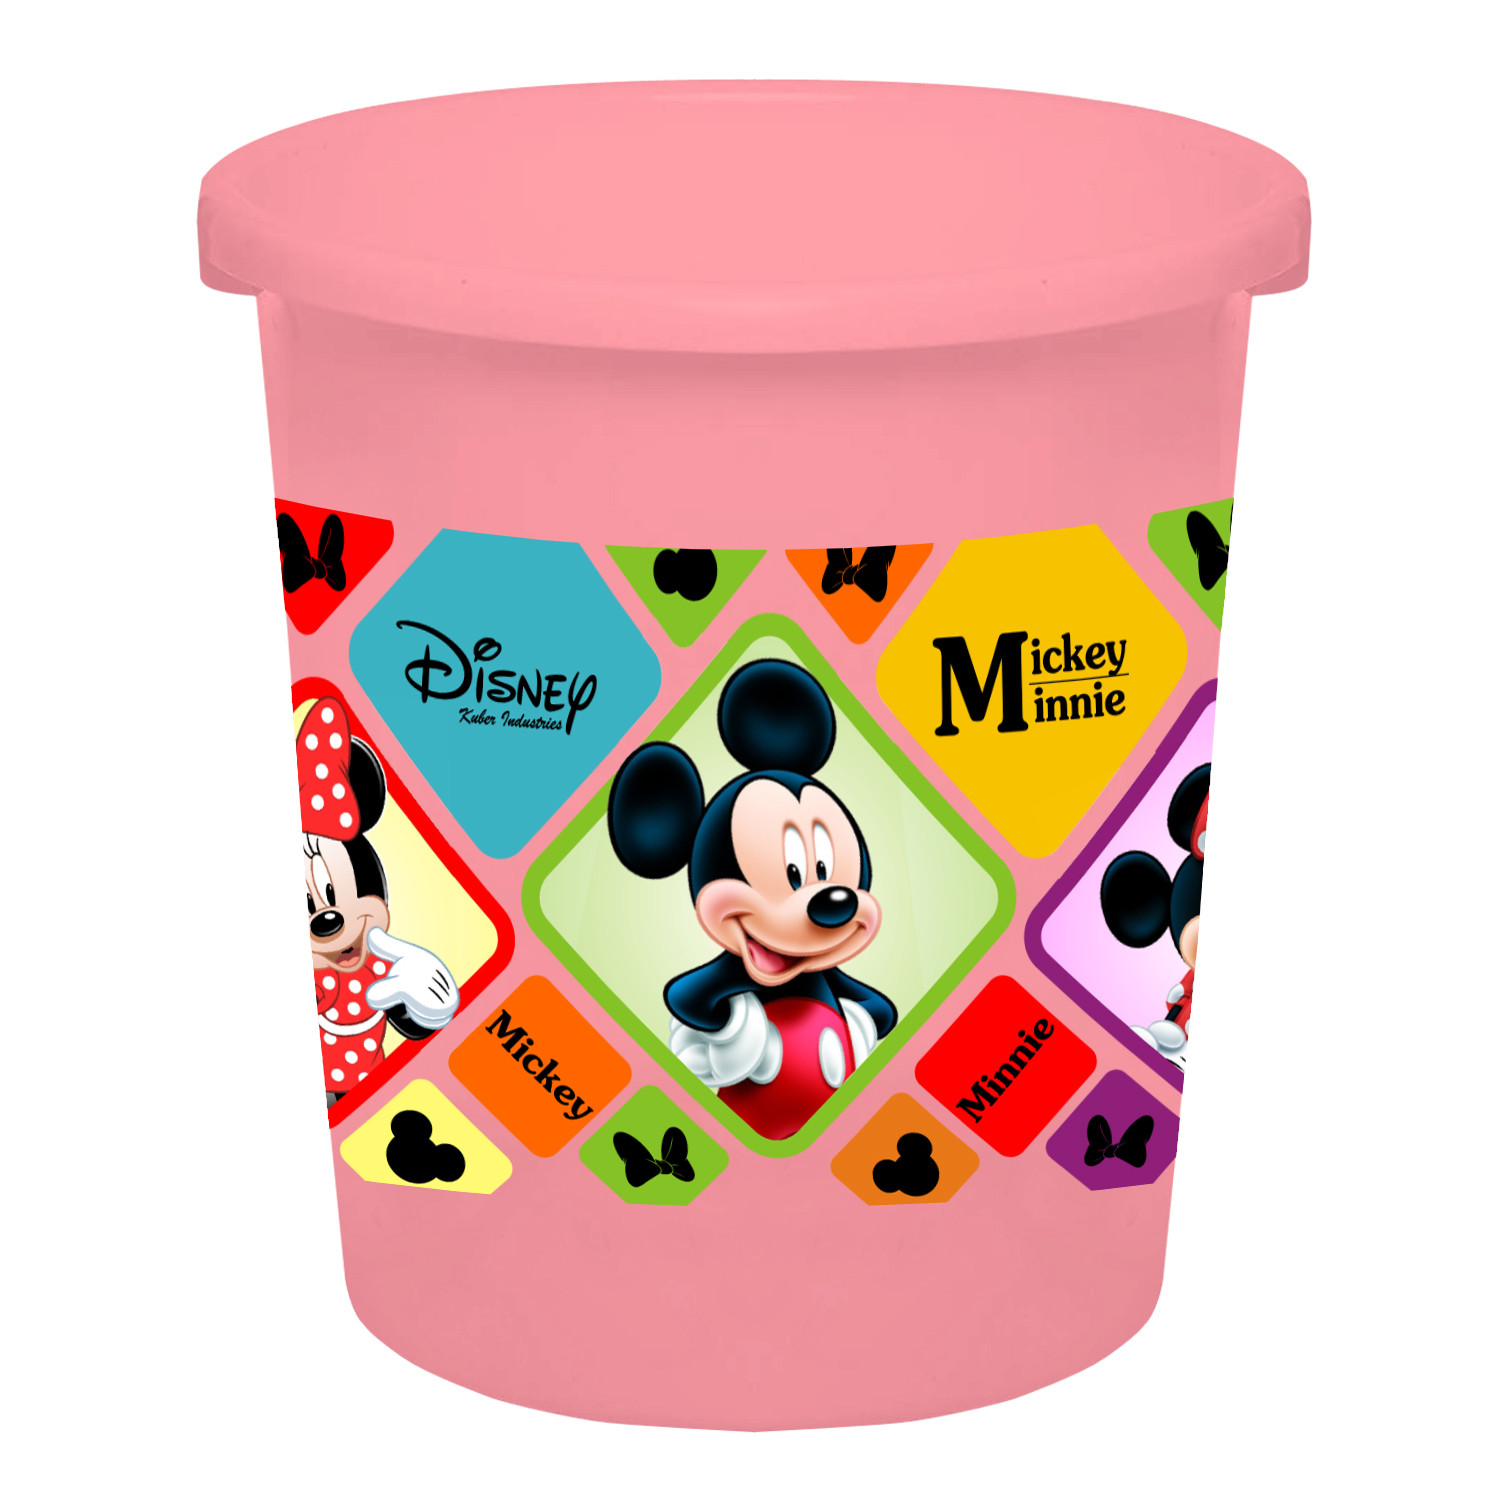 Kuber Industries Disney Mickey Minnie Print Plastic 3 Pieces Garbage Waste Dustbin/Recycling Bin for Home, Office, Factory, 5 Liters (Pink & Cream & Black) -HS_35_KUBMART17807